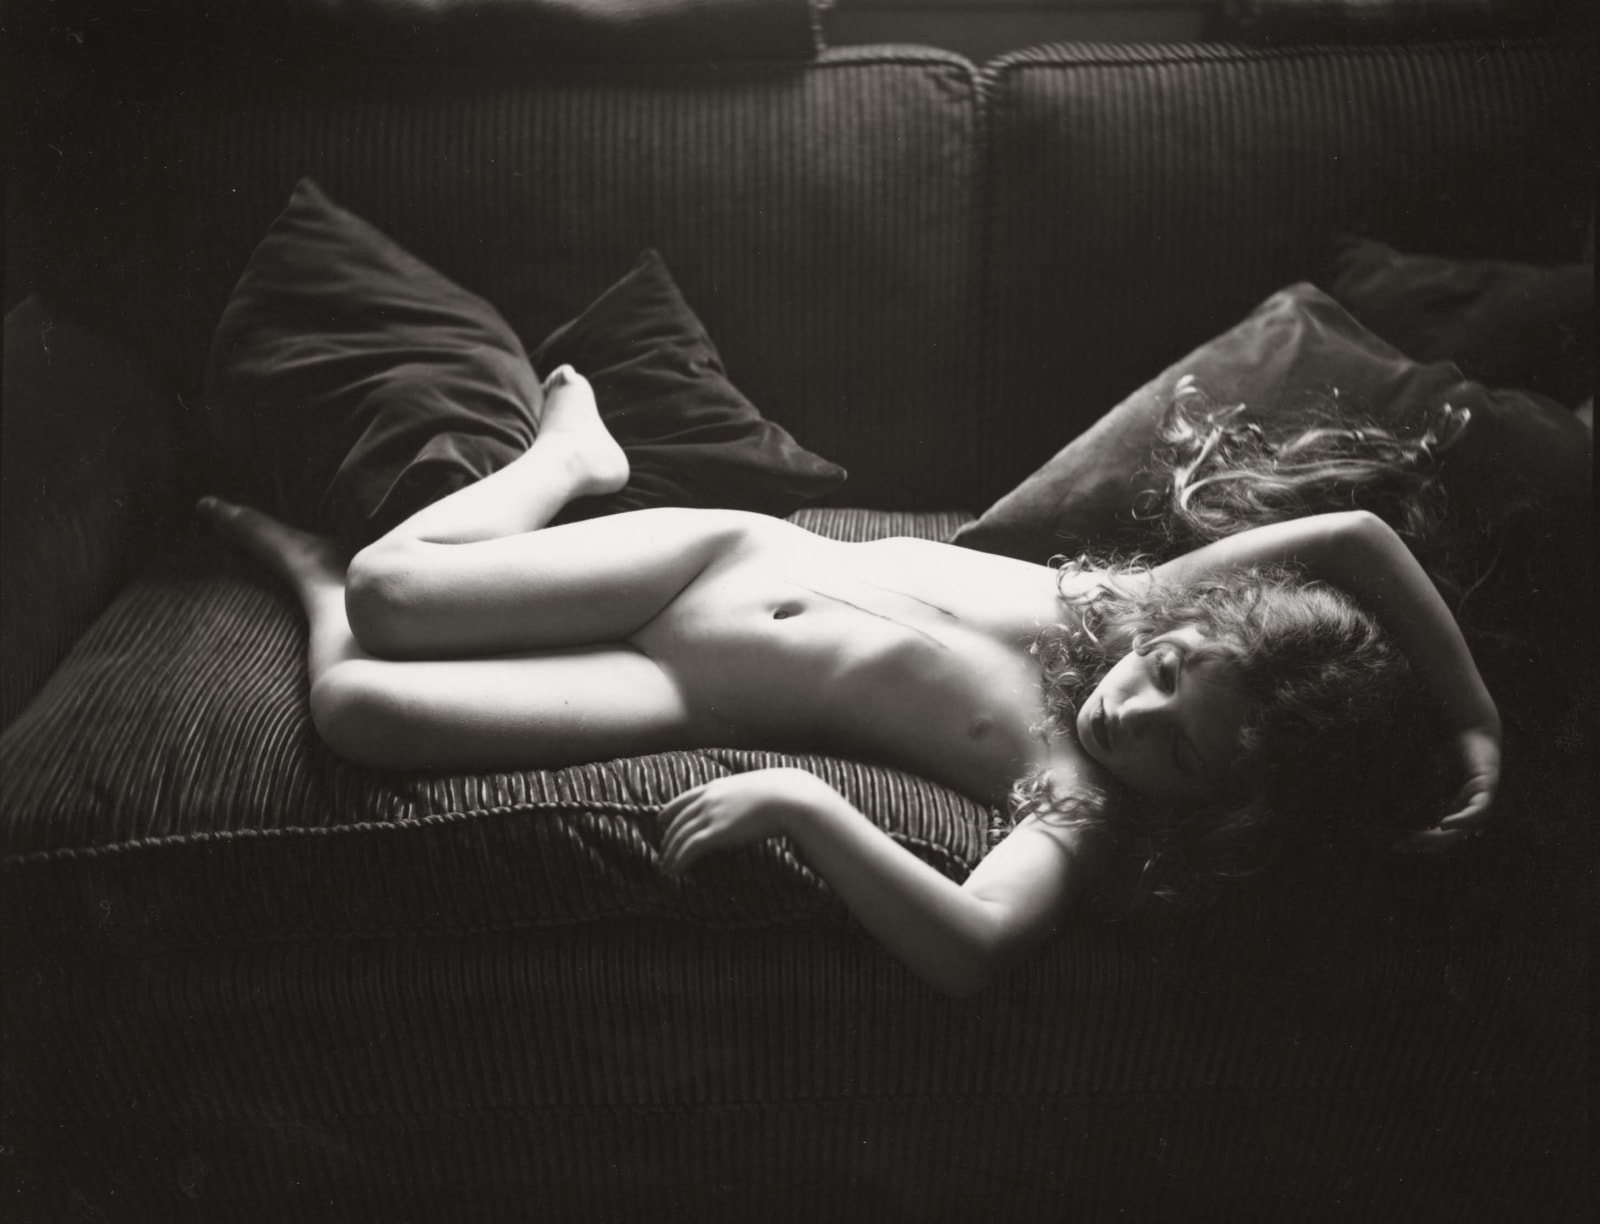 adolescent girl reclining nude on couch with dog scratches on her abdomen, by Sally Mann